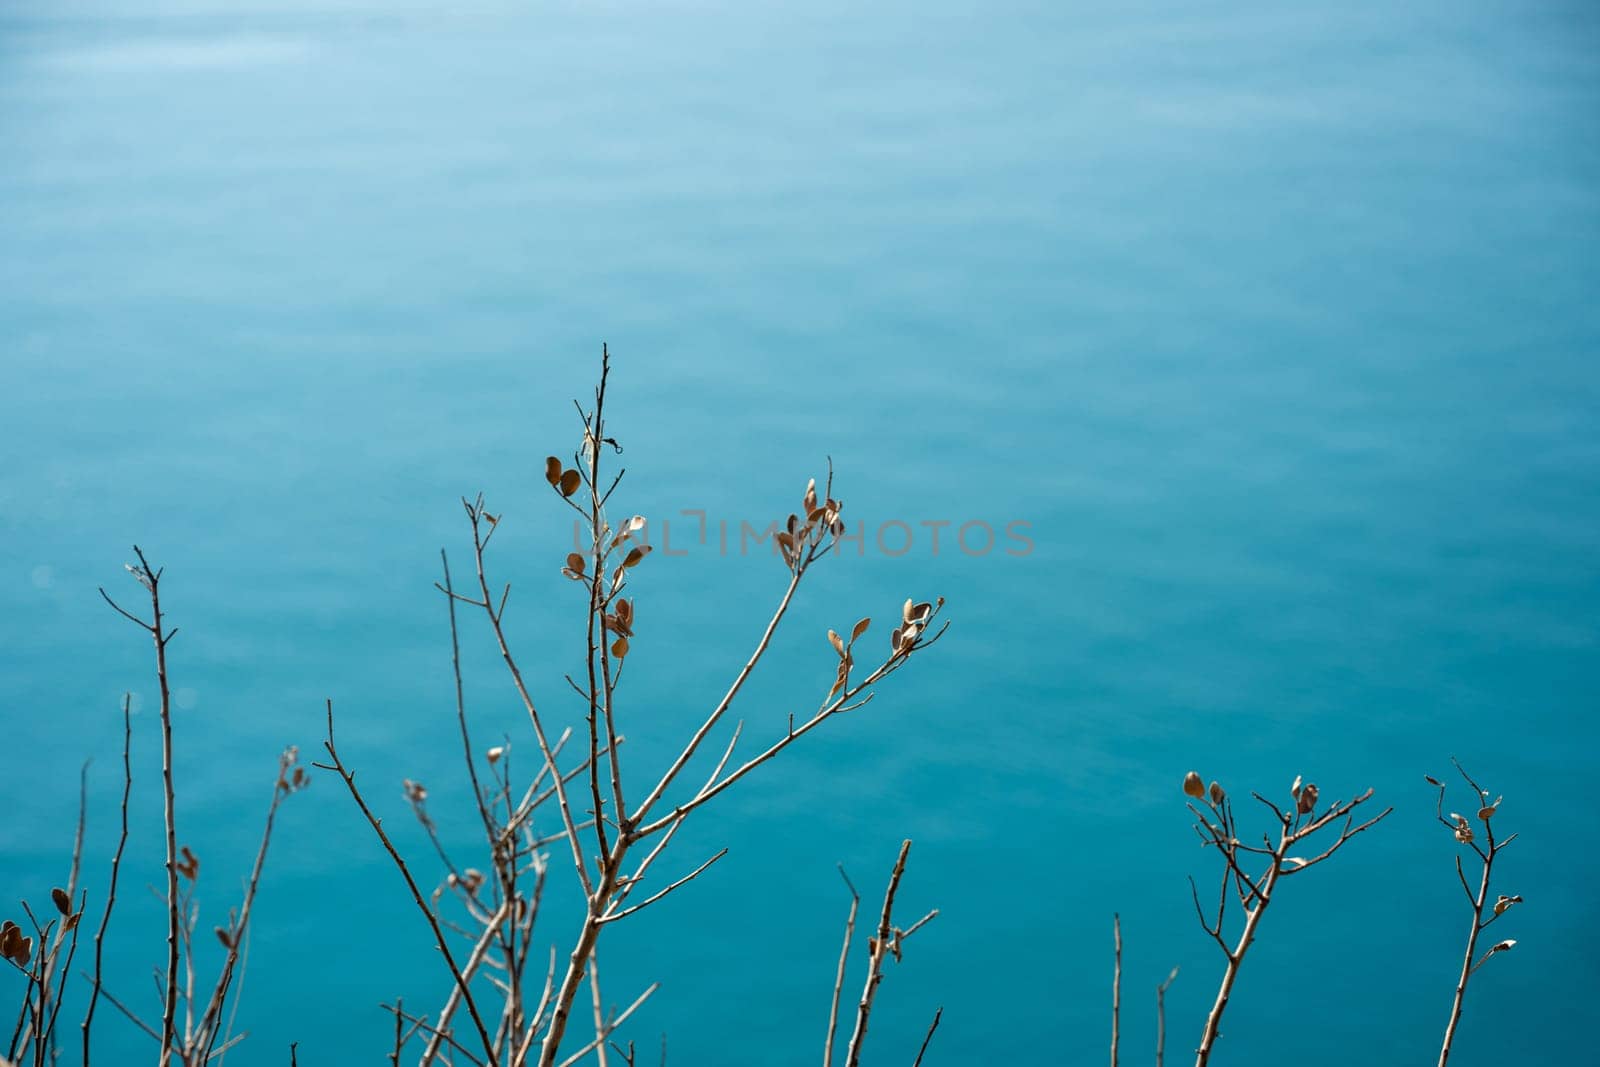 Plant branches. Blurred sea visible in the background